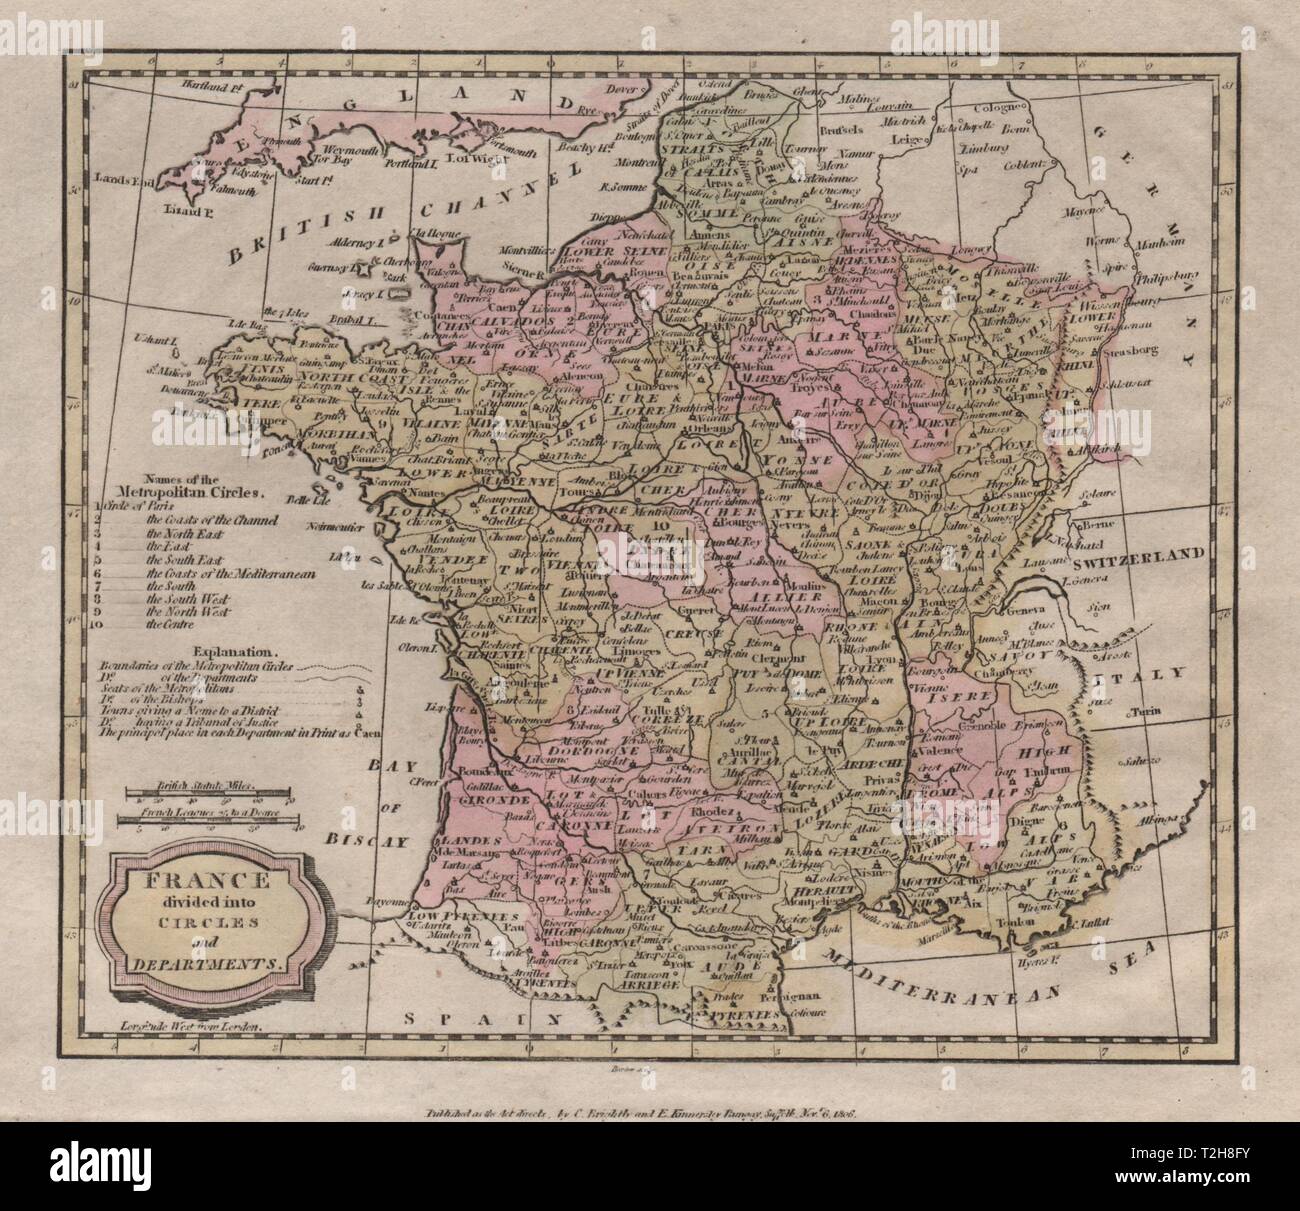 France divided into circles and departments. BARLOW 1807 old antique map chart Stock Photo